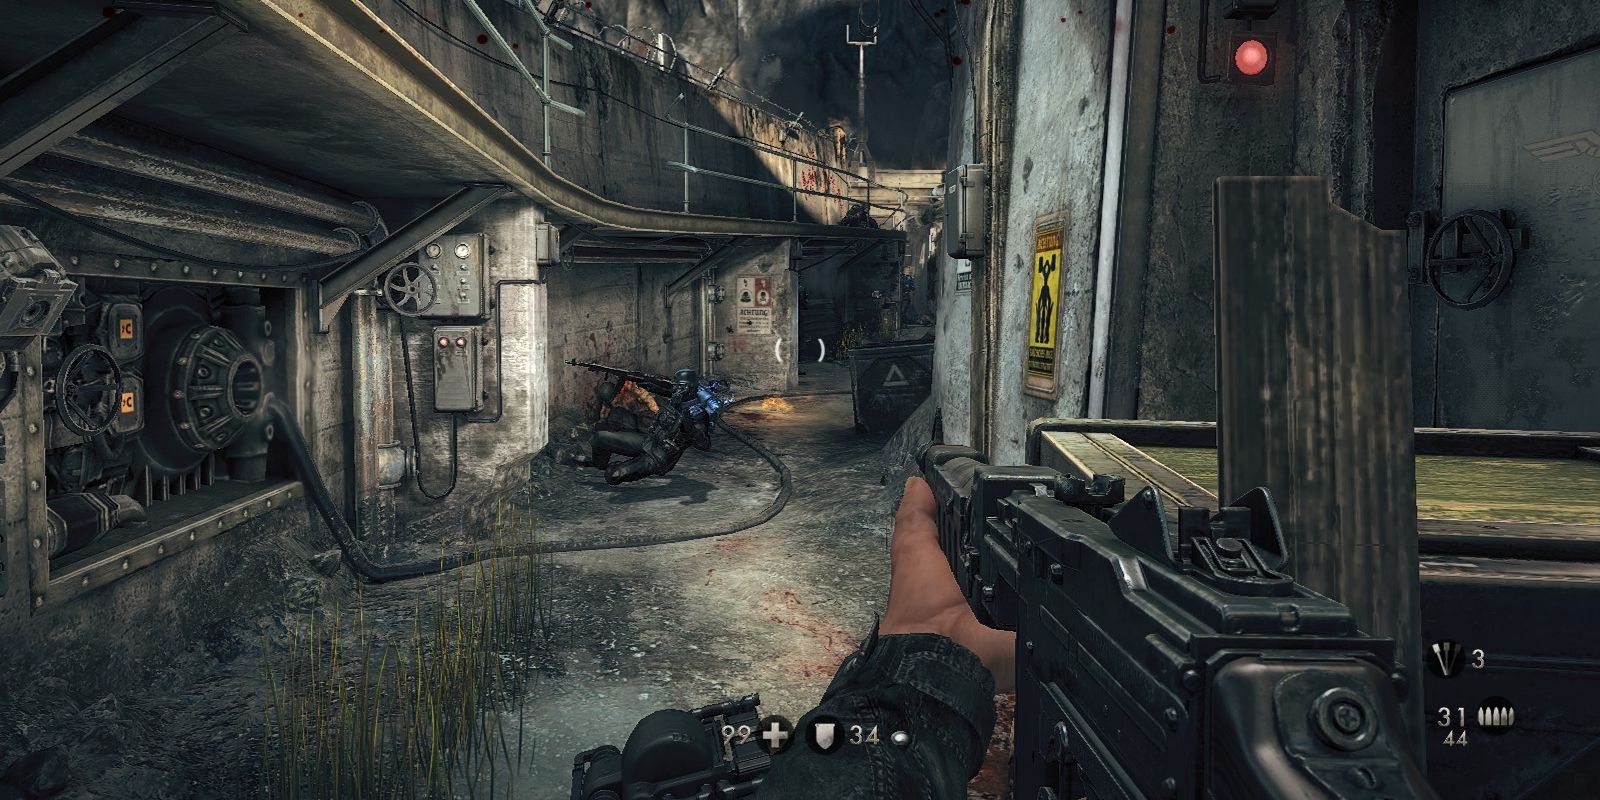 Wolfenstein The New Order first-person shooter gameplay during a rainy level